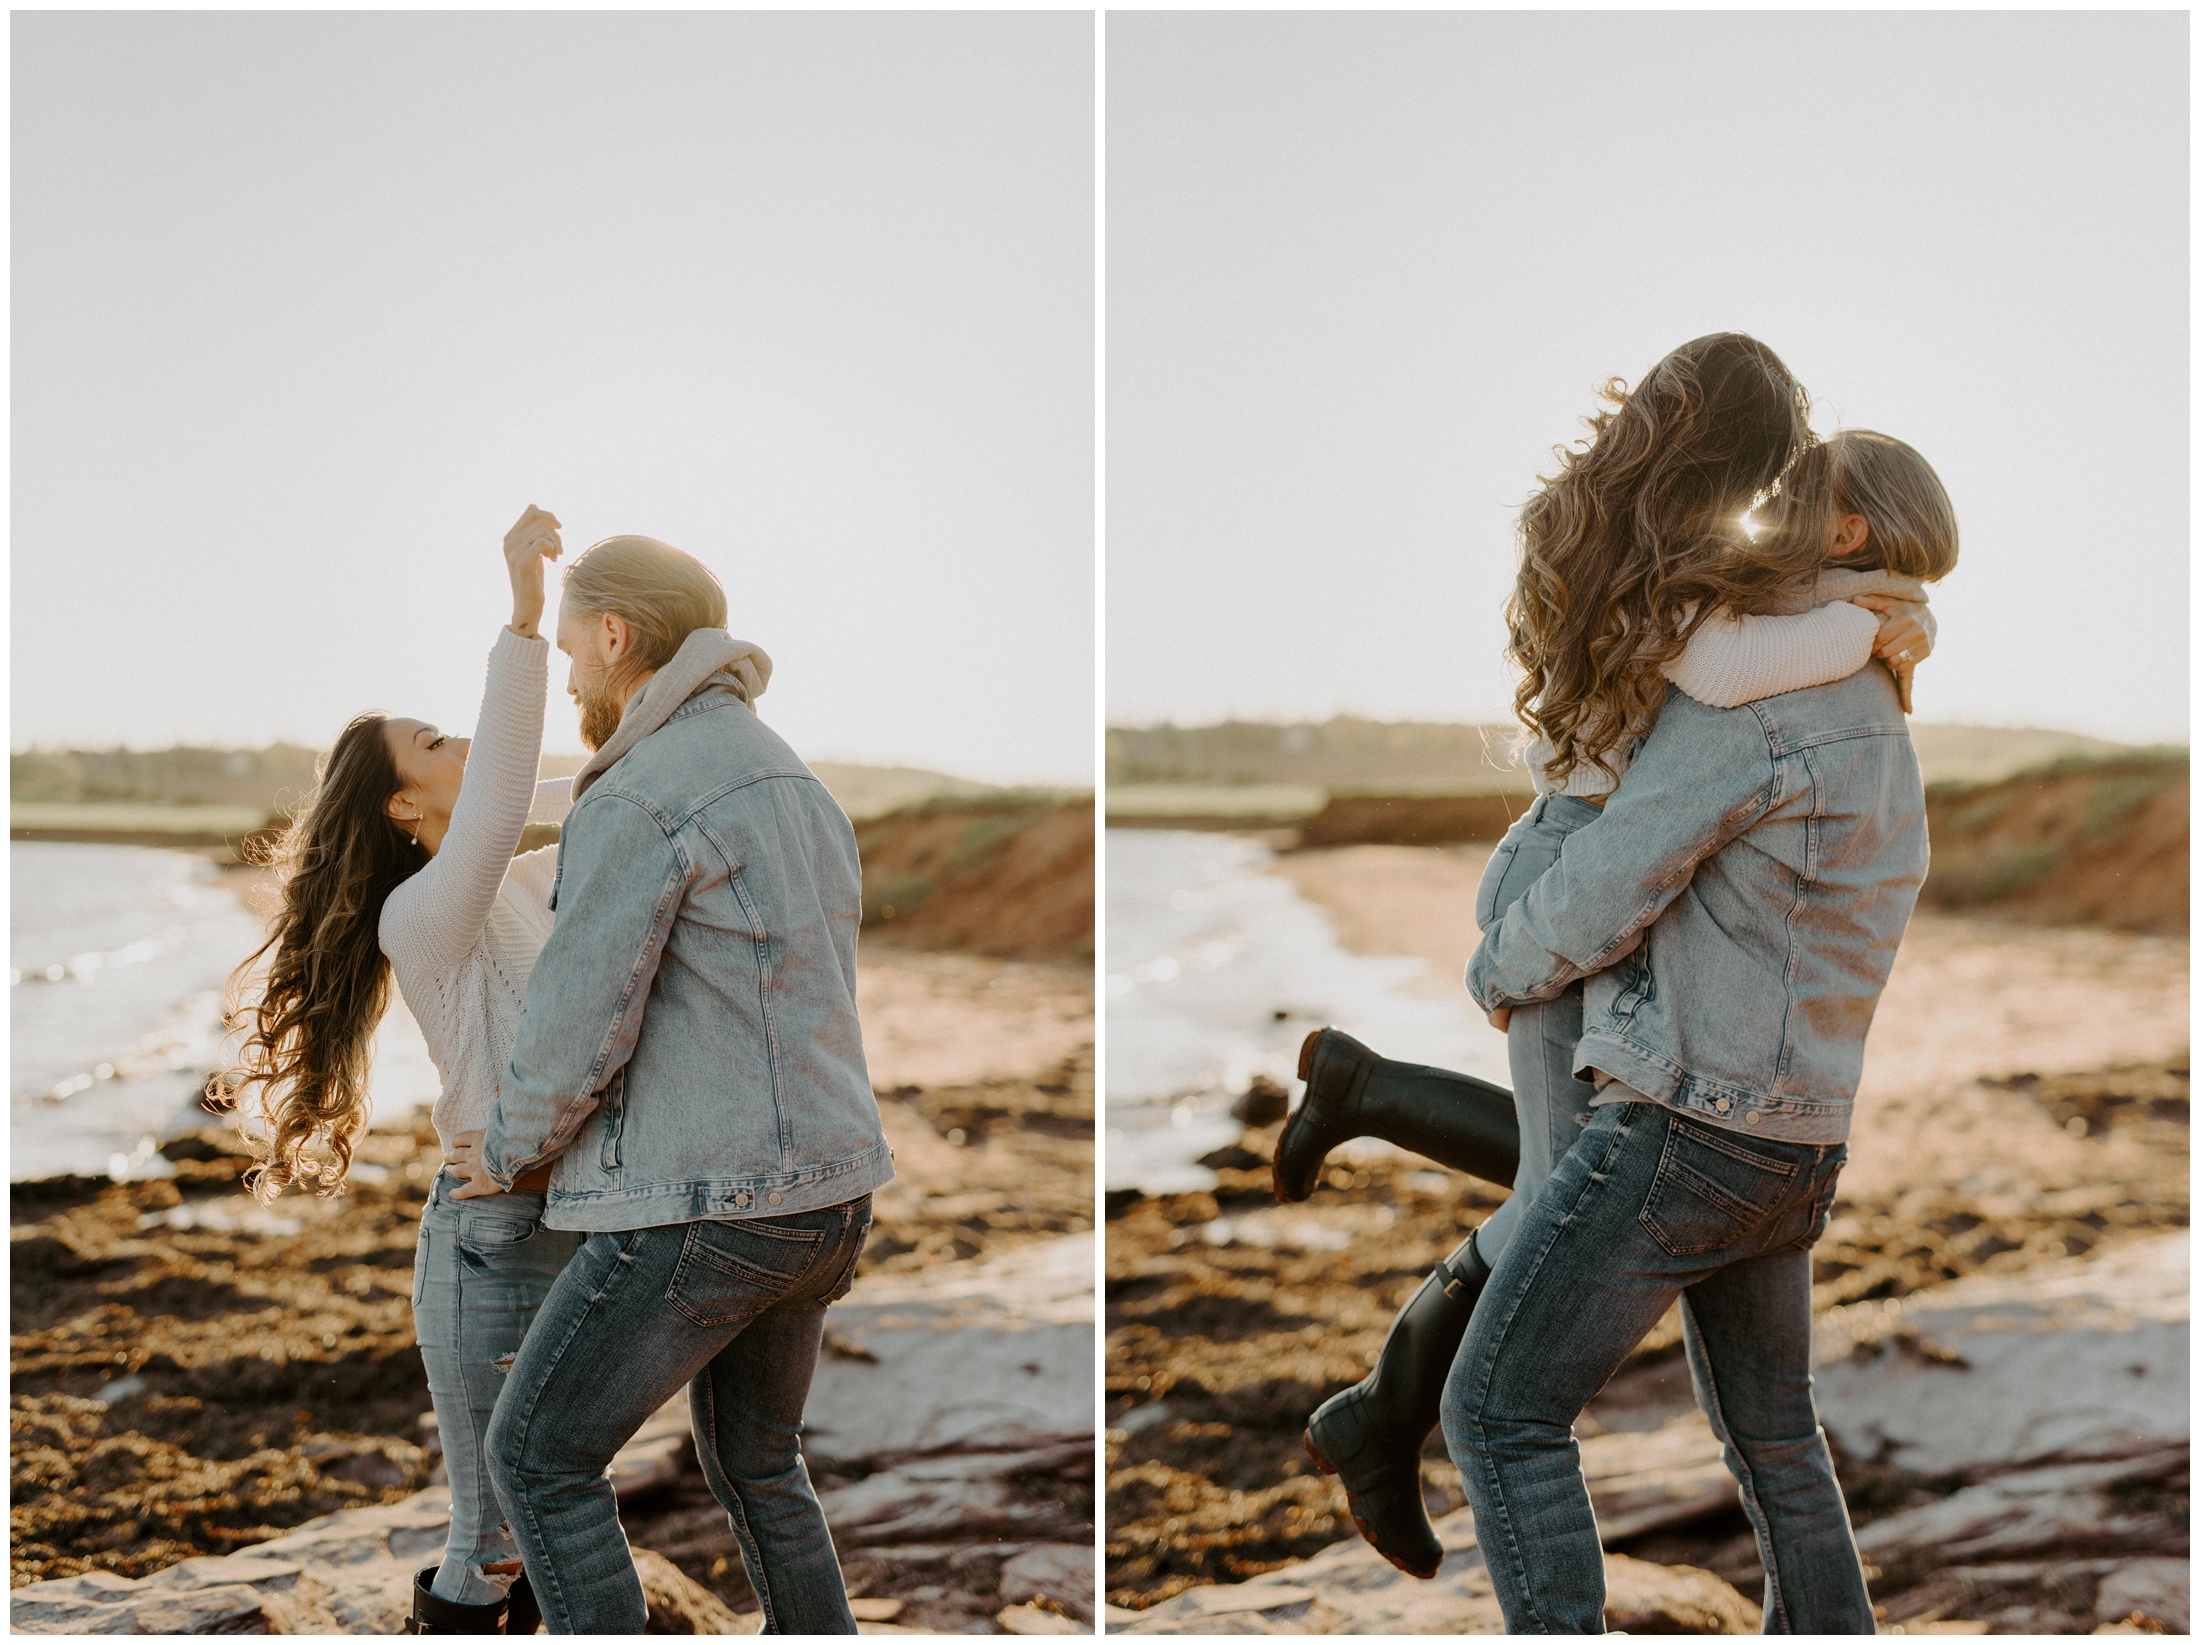 Red Sand Beach Engagements On Prince Edward Island at Sunset | Jessica Heron Images_0001.jpg